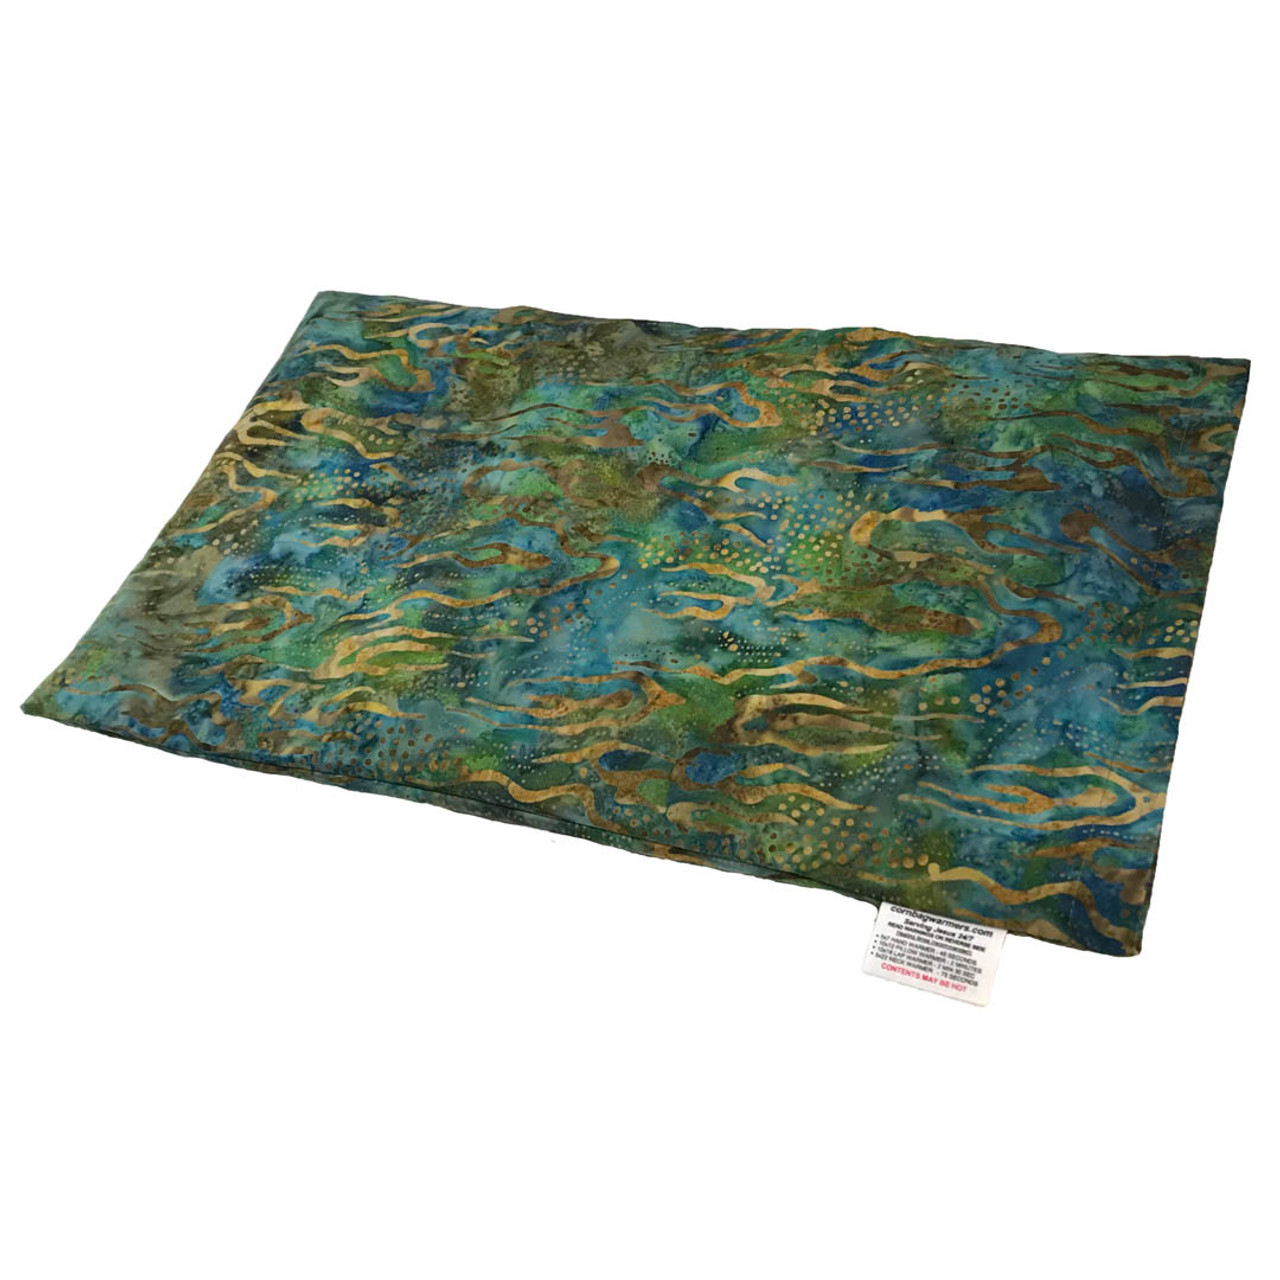 Abstract Earth Microwave Corn Heating Pad, Large Lap Warmer. 